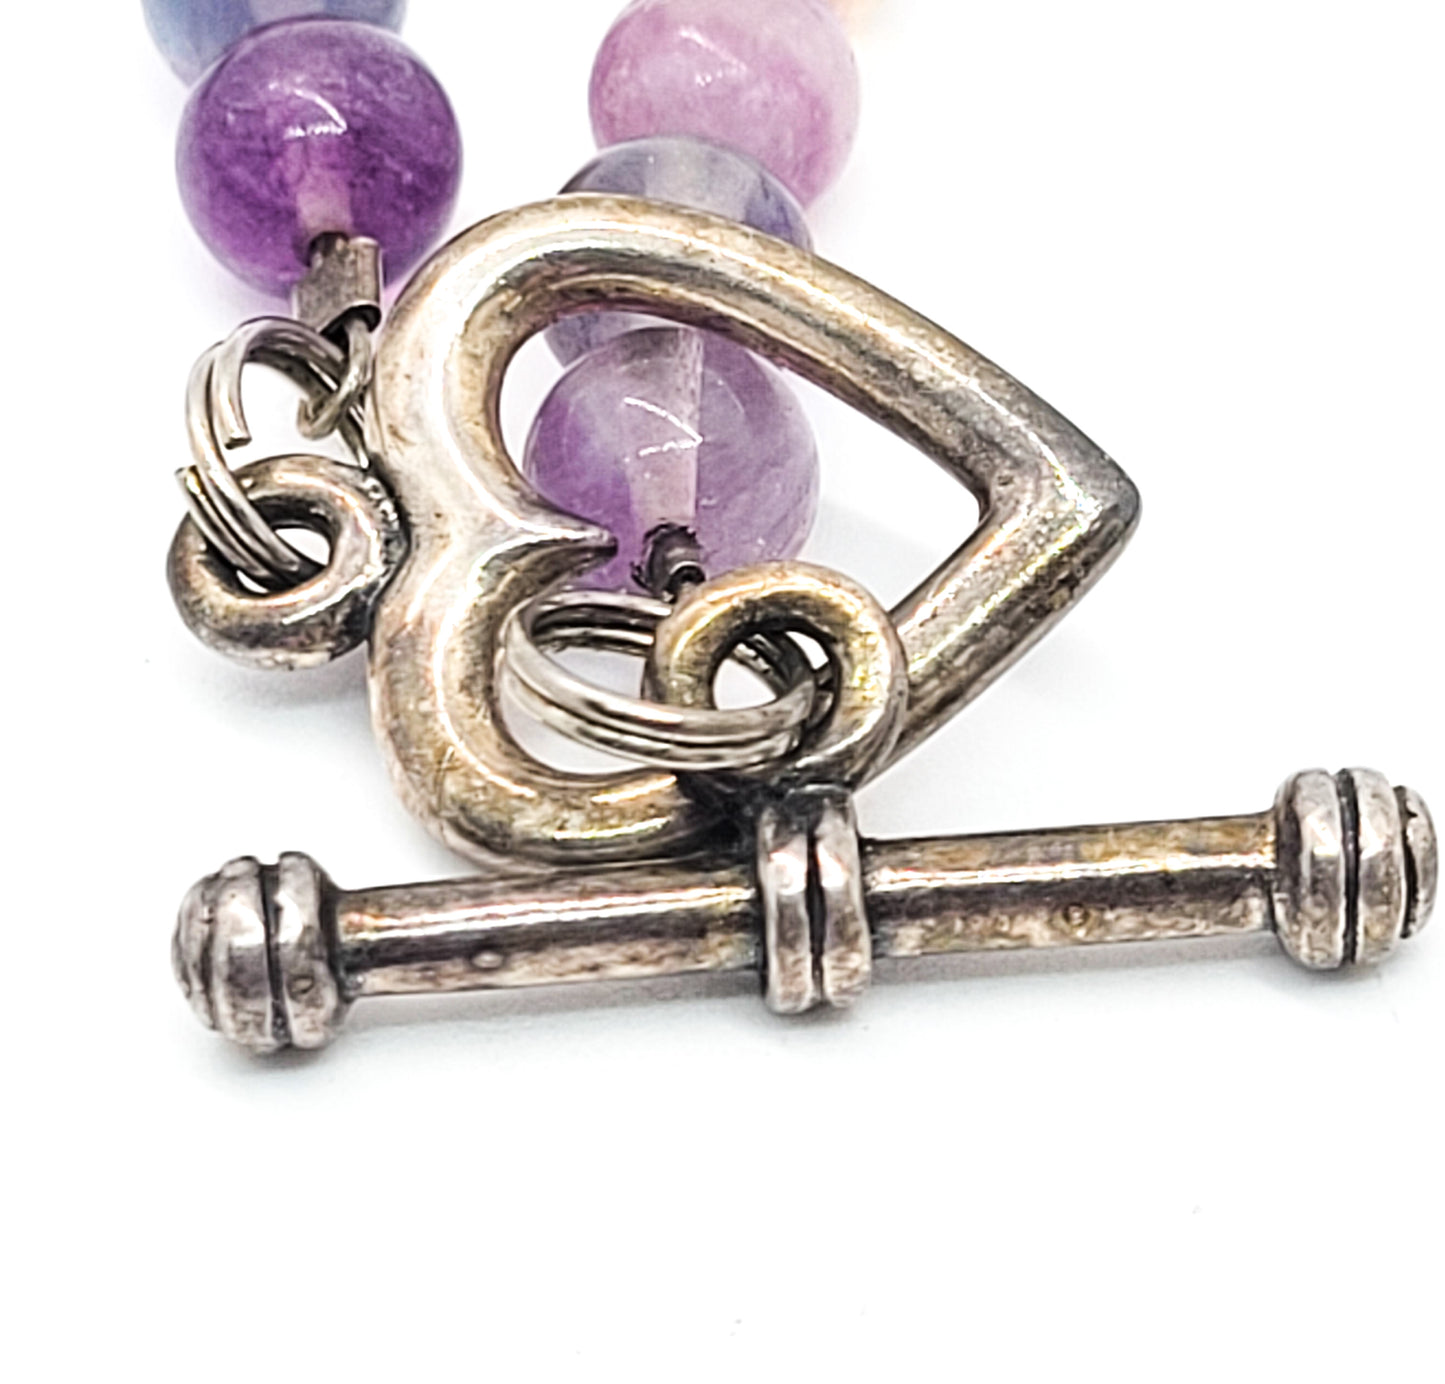 Lepidolite gemstone artisan necklace with flourite and amethyst necklace